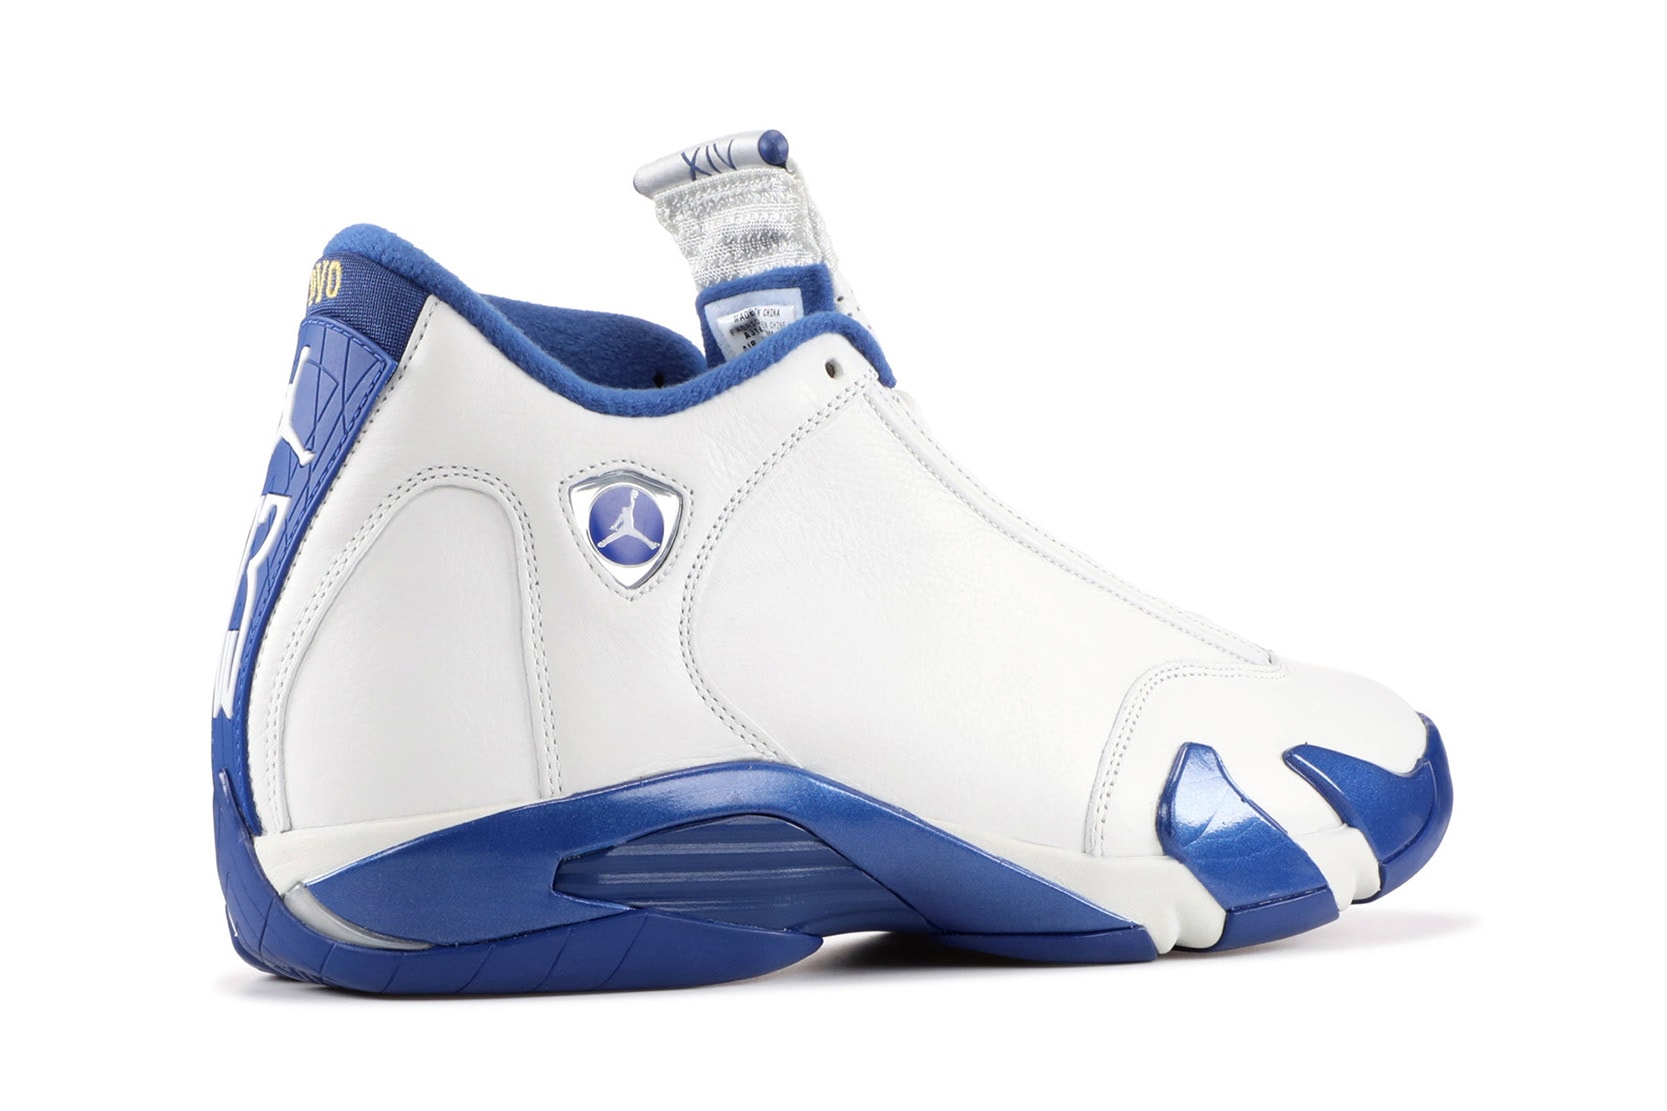 Drake OVO x Air Jordan 14 "Kentucky" PE For Sale $25,000 USD Flight Club Shoes Kicks Trainers Sneakers Cop Buy Purchase Available In-Stock Now Unreleased Never-Seen-Before